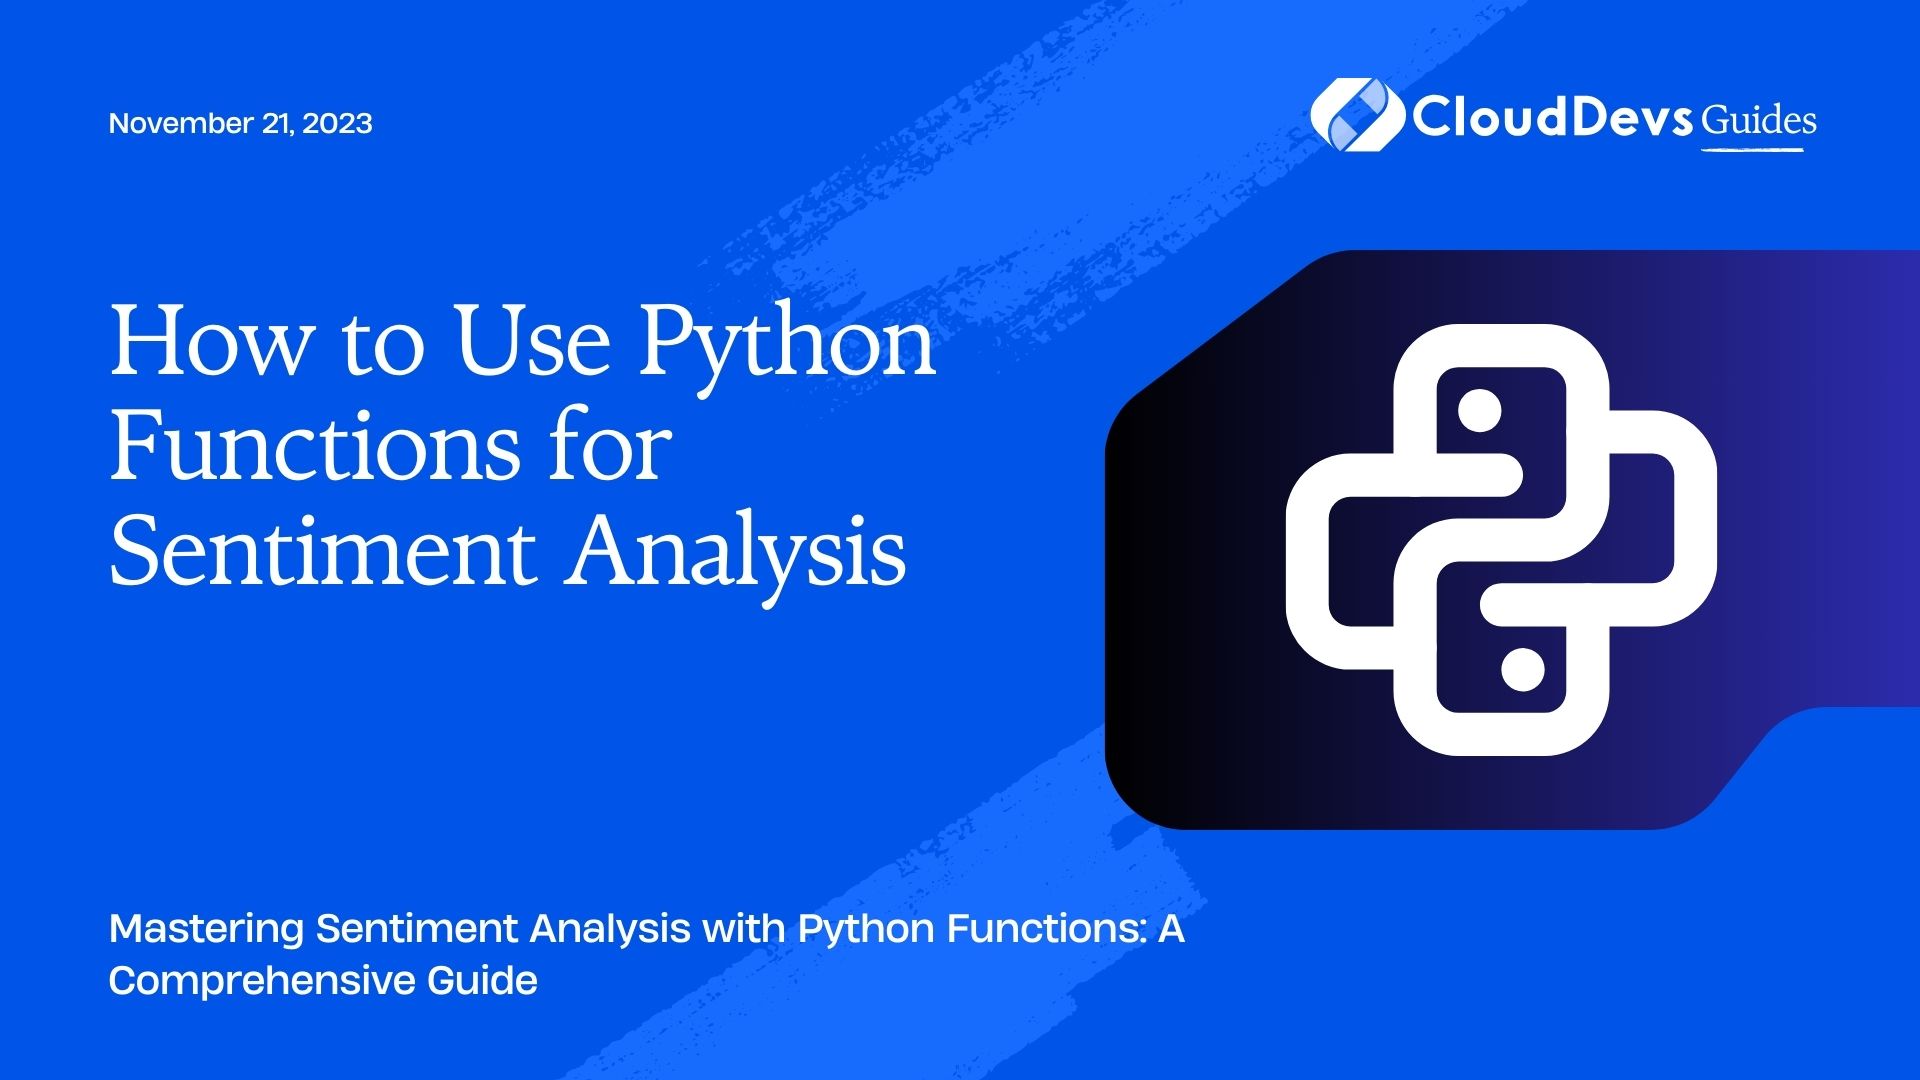 How to Use Python Functions for Sentiment Analysis